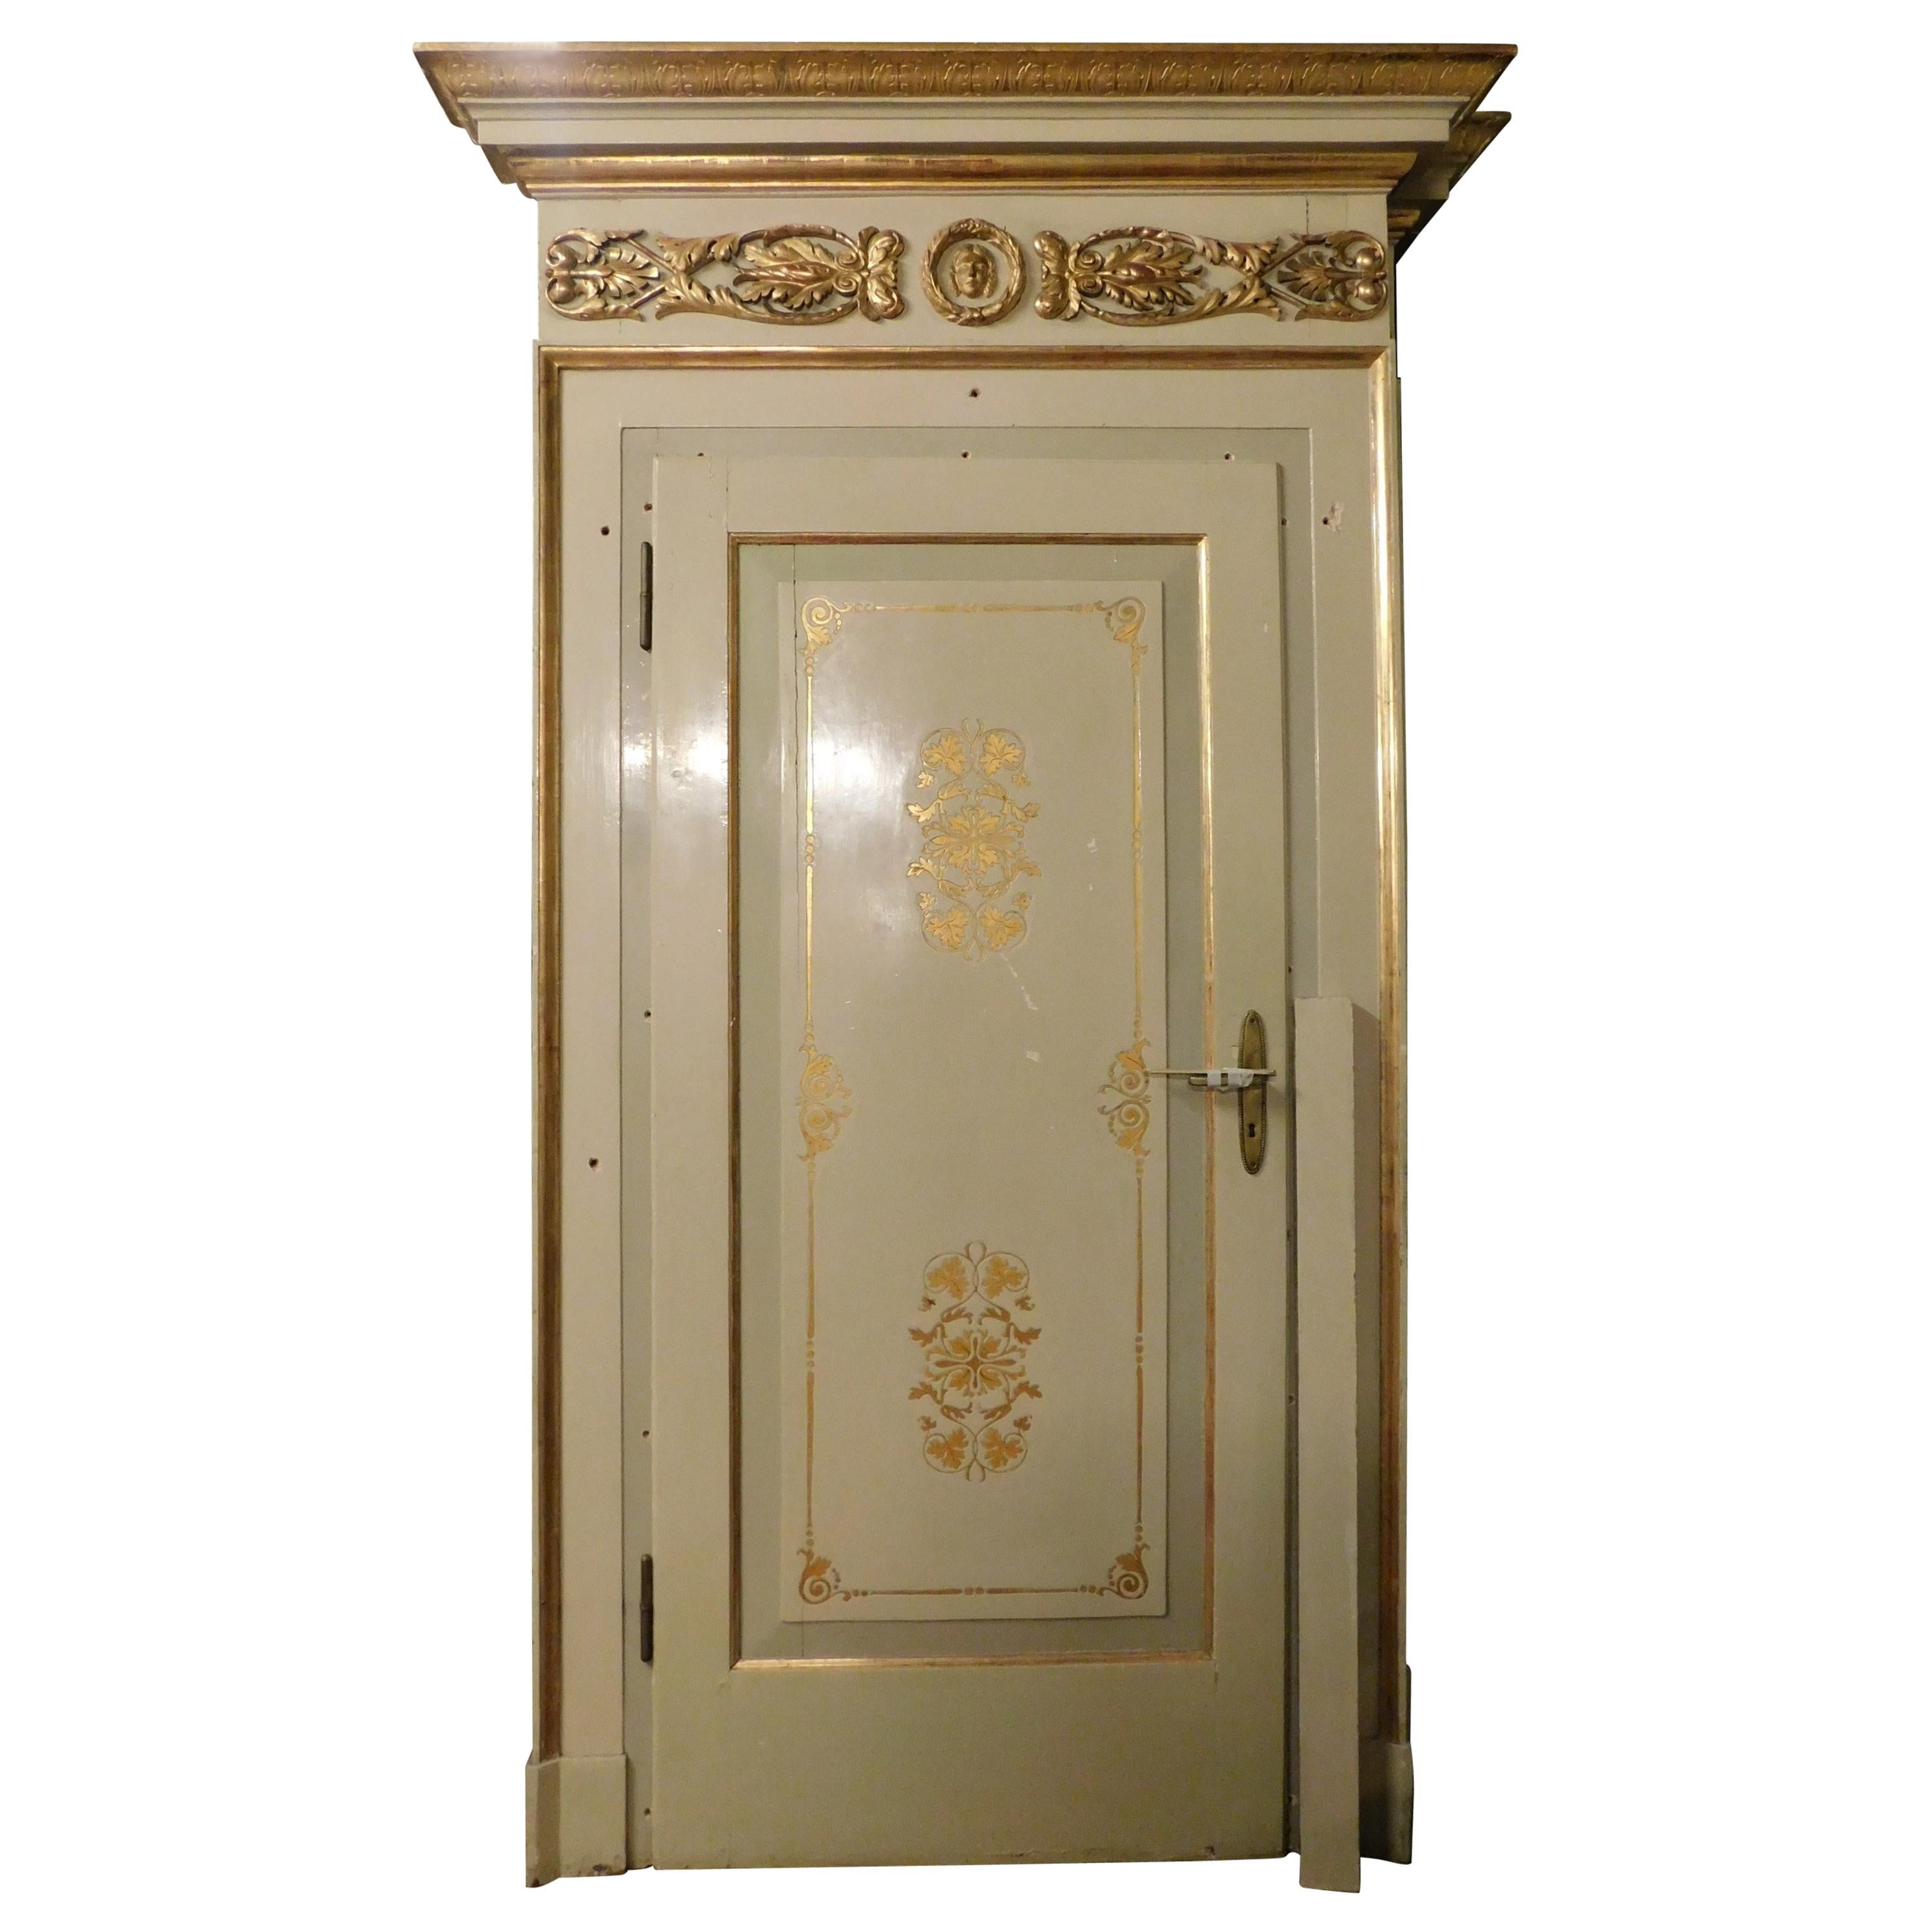 Set of 3 Vintage Lacquered/Gilded Doors, Complete with Frame, Early '900 Italy For Sale